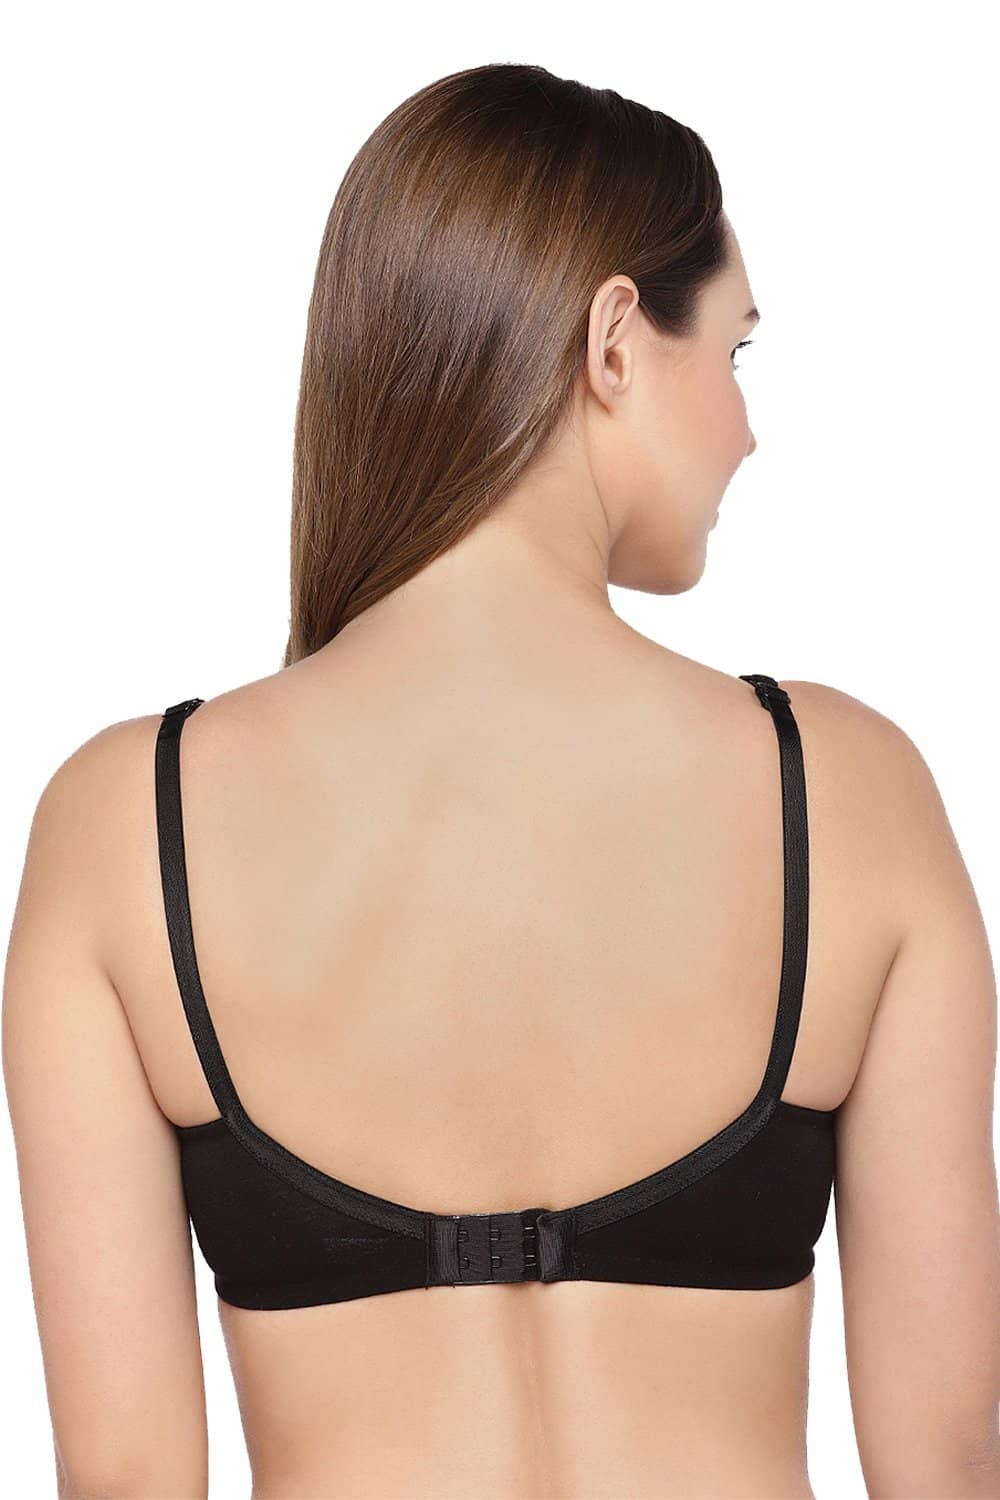 Organic Cotton  Antimicrobial  Seamless Side Support Bra-ISB057-Black-